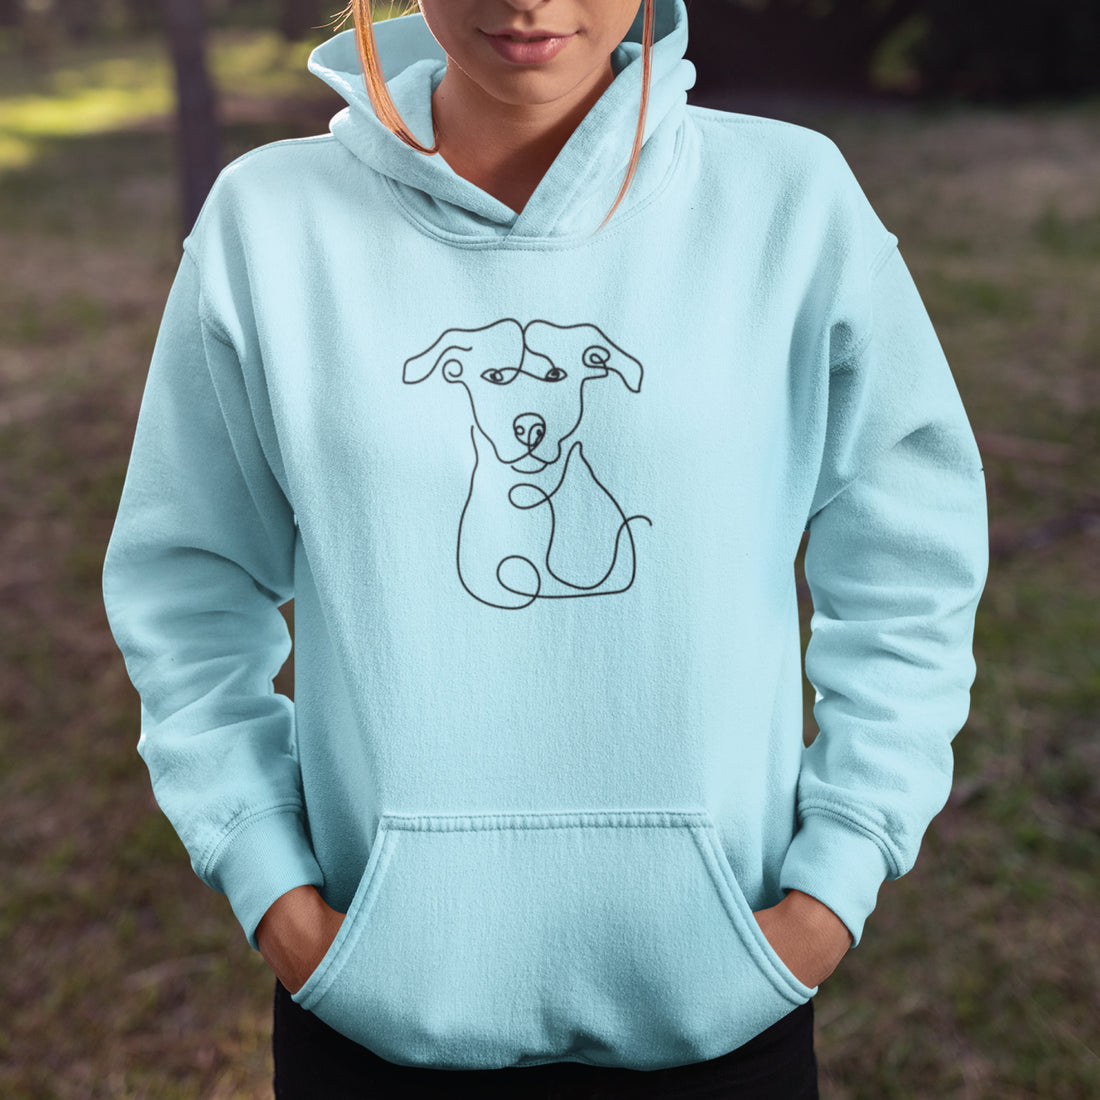 Tailored Treasures: Personalized Drawing Hoodies for Heartfelt Gifts